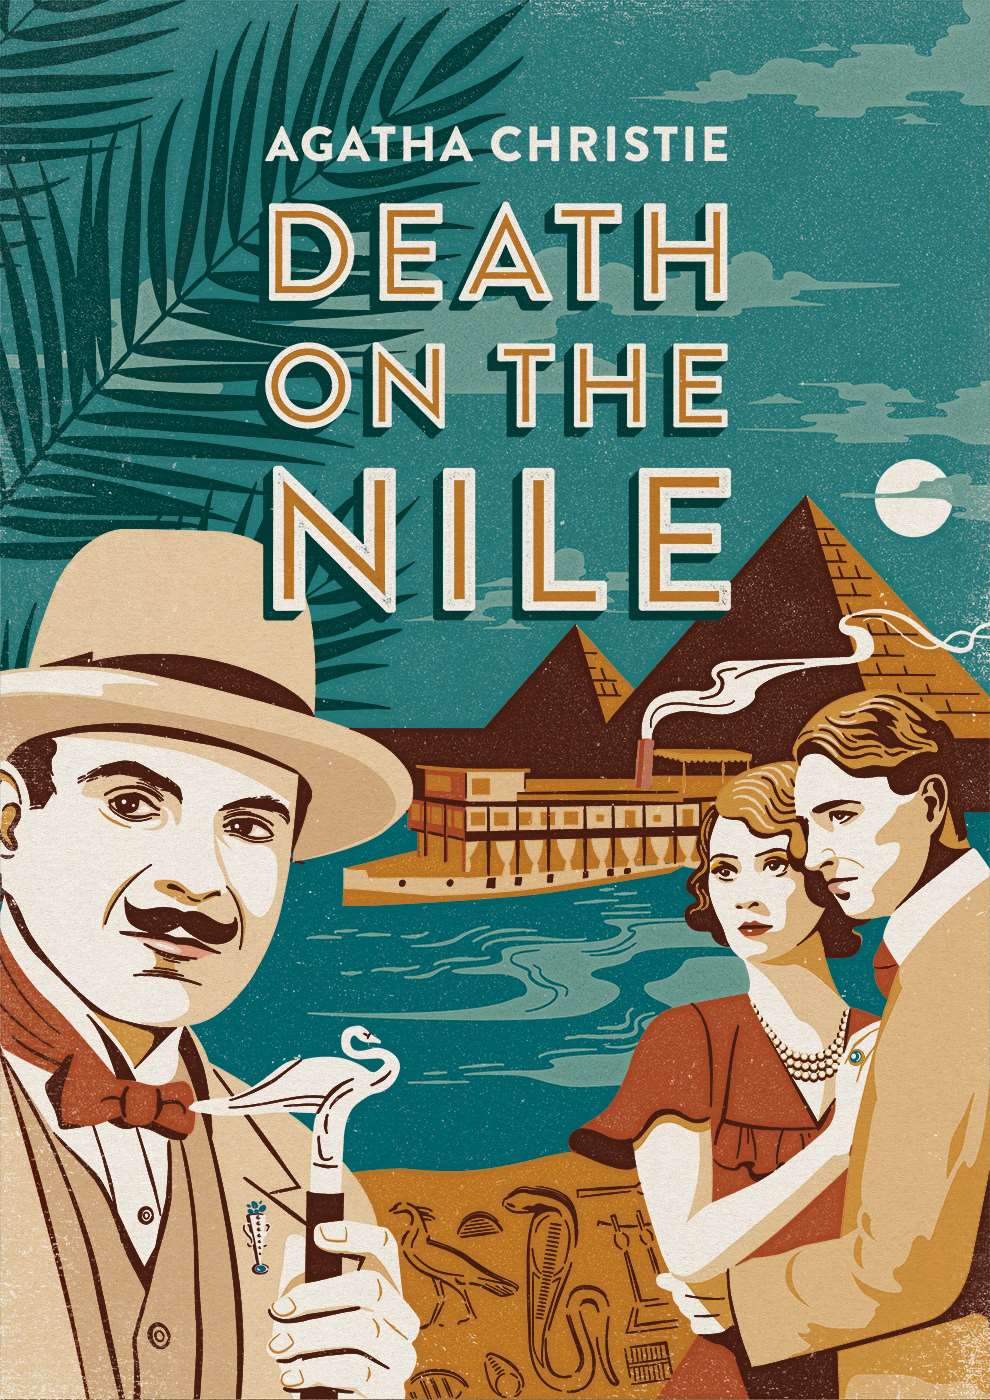 Susan Burghart, Death on the Nile, book cover illustration by Agatha Christie.